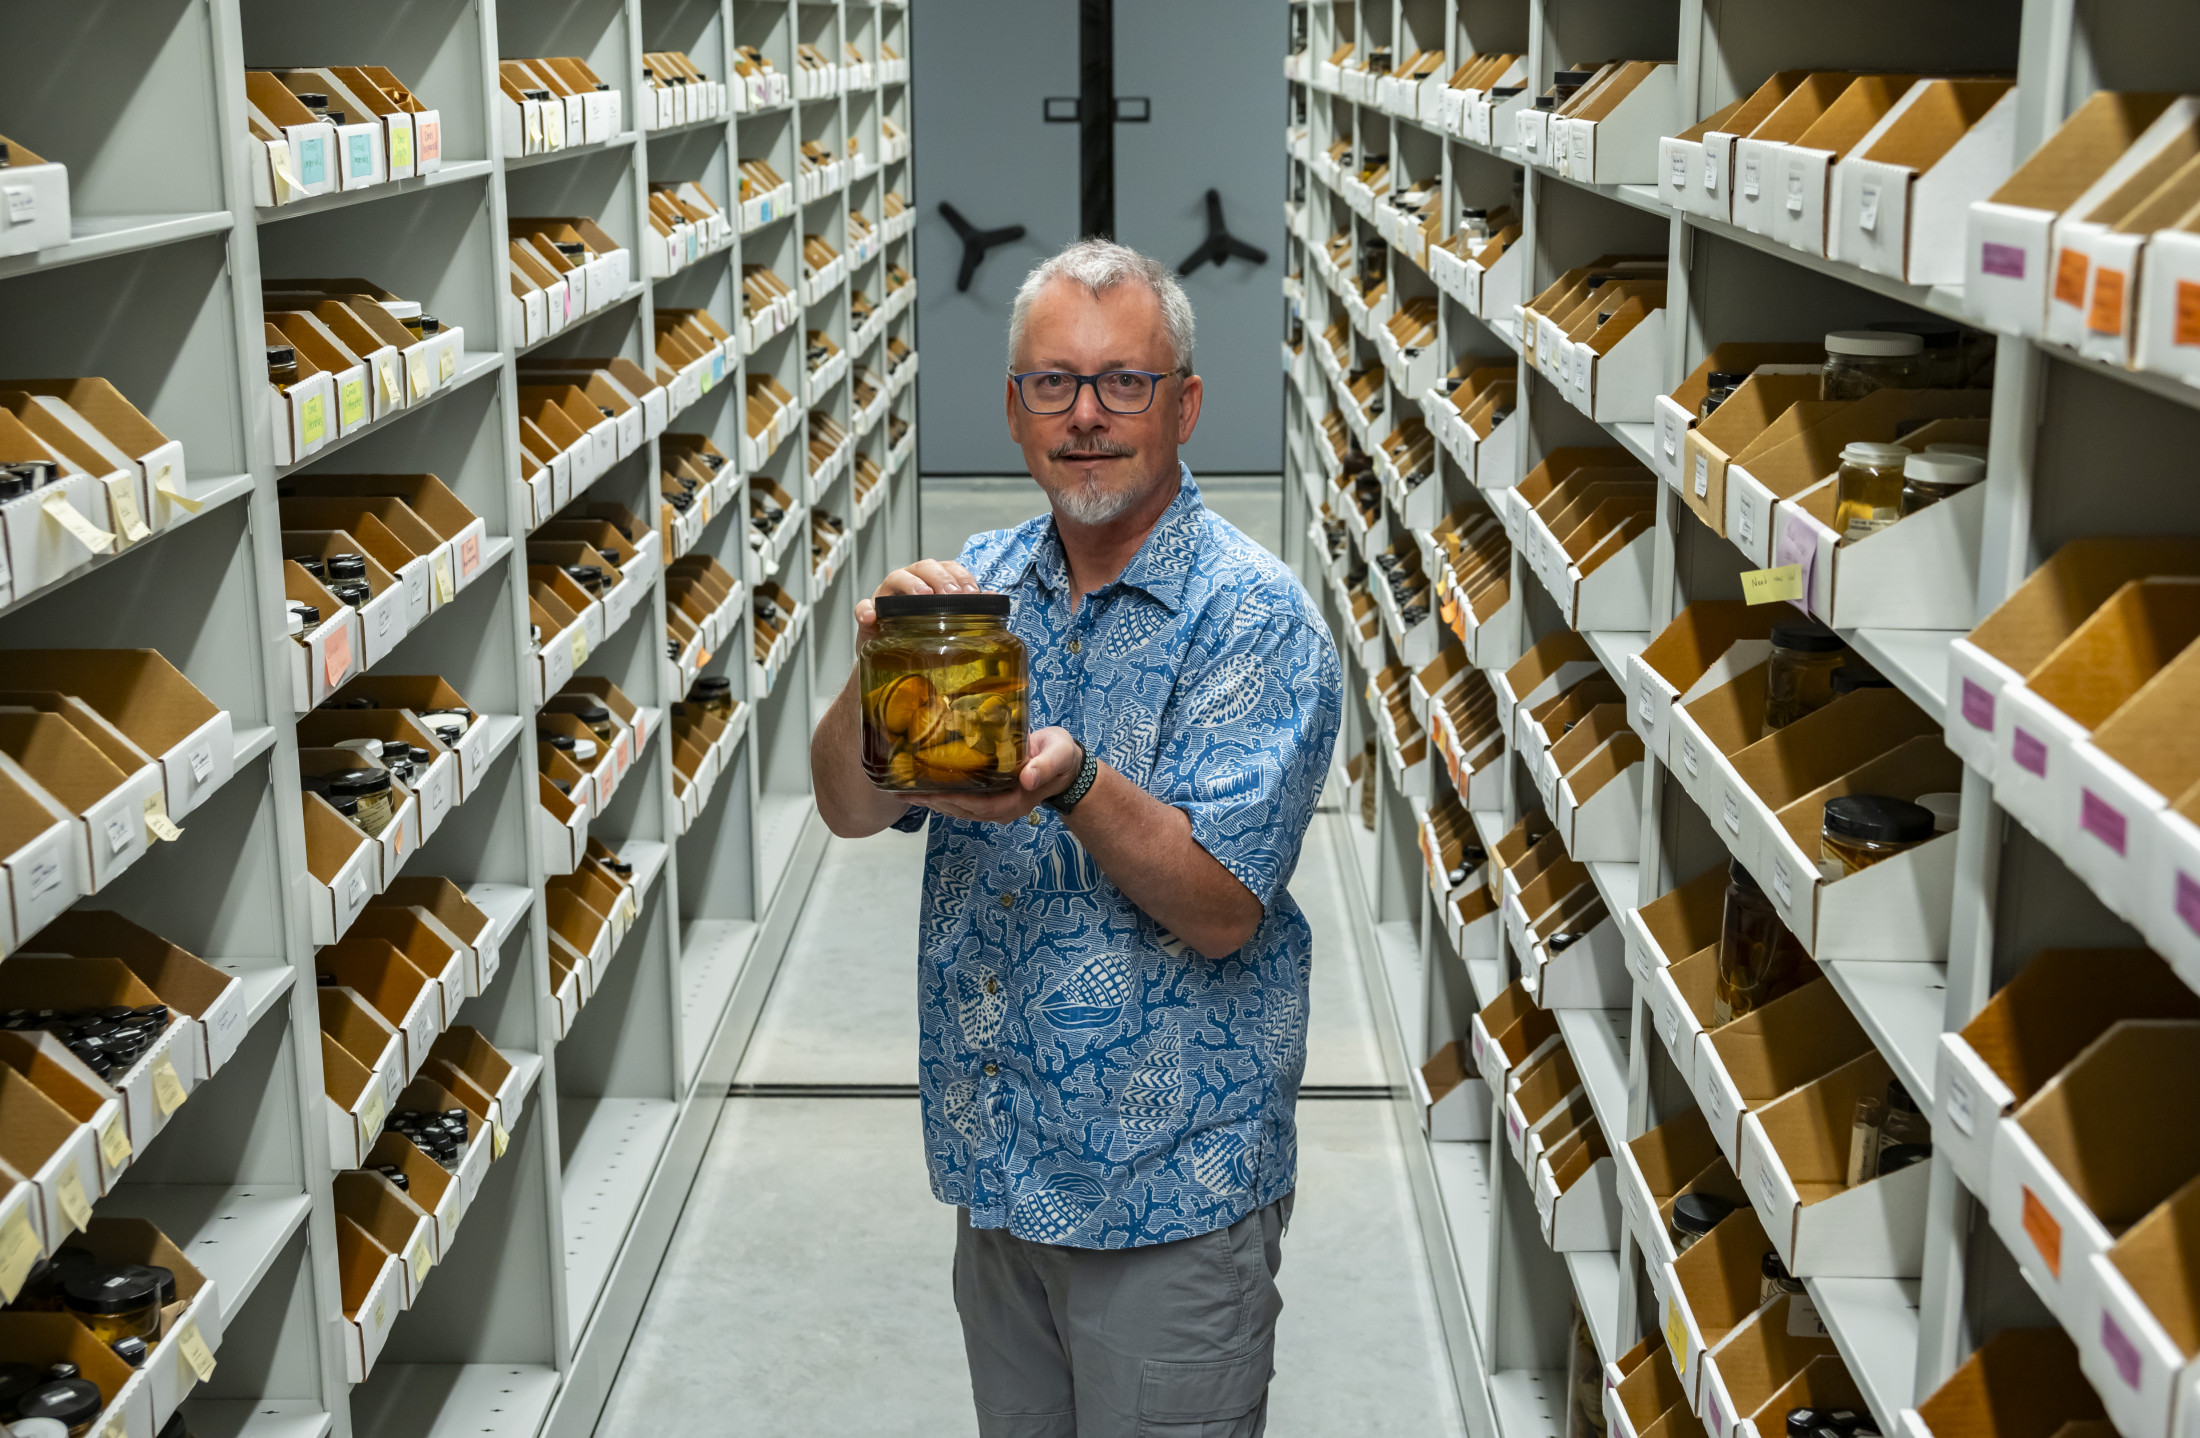 John Slapcinsky stands in the museum's invertebrate zoology collection, holding a jar.